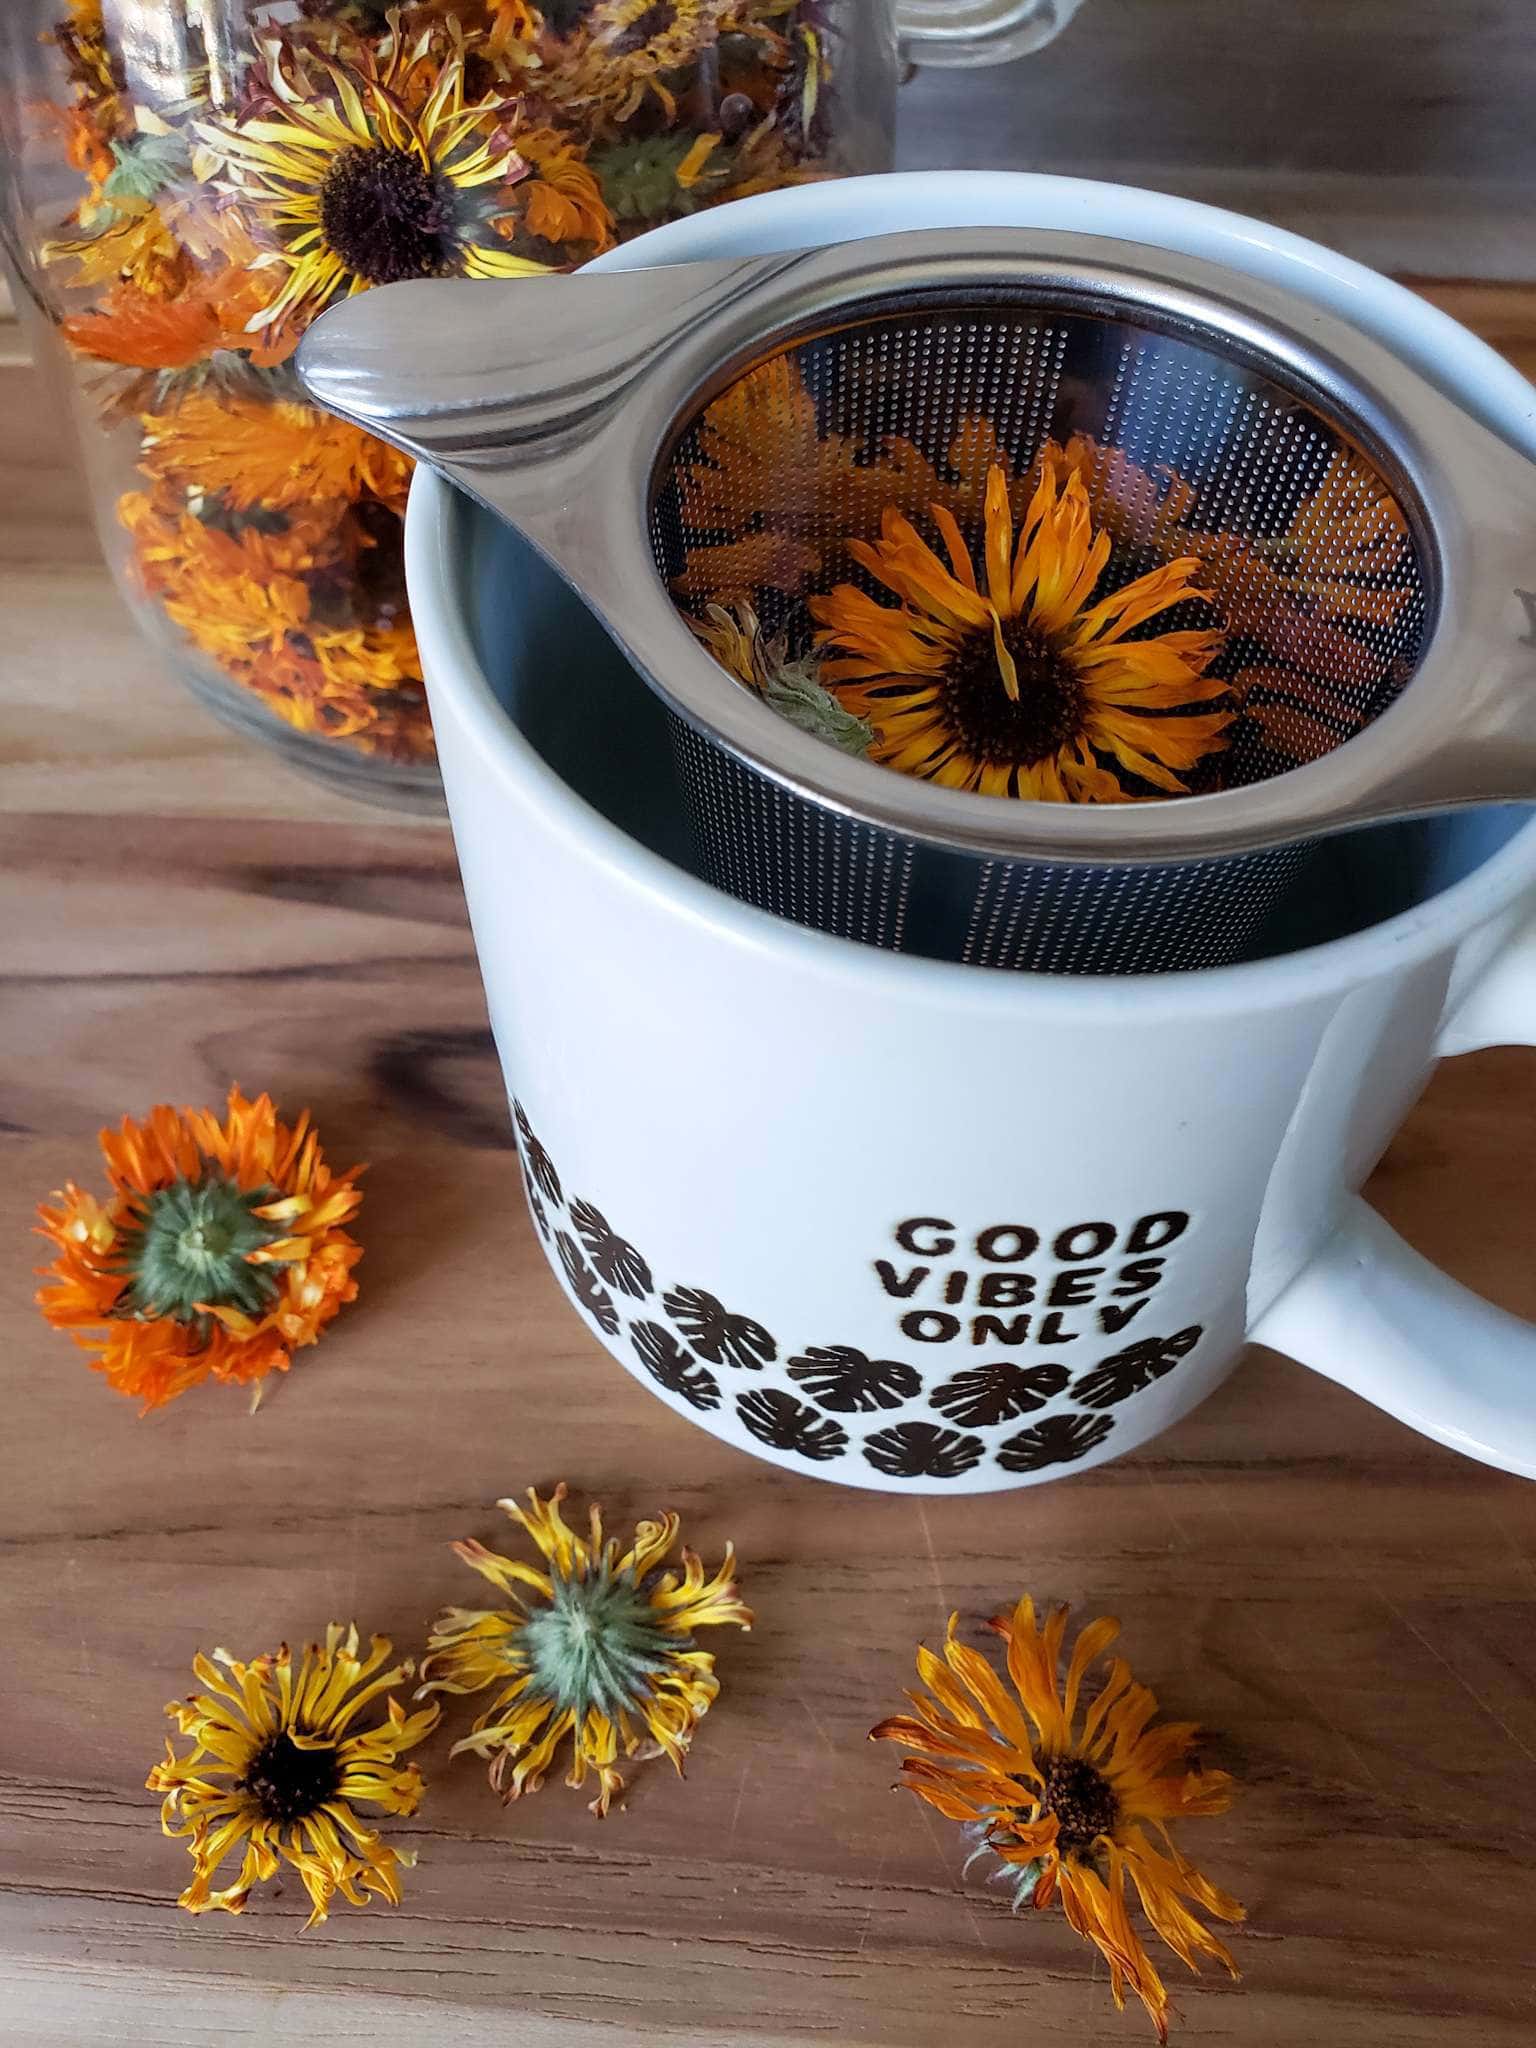 A mug that reads "good vibes only" on the side, with a stainless steel tea infuser perched inside. Several dry calendula heads are inside the infuser, along with laying around the base of the tea mug and in a jar in the background. 